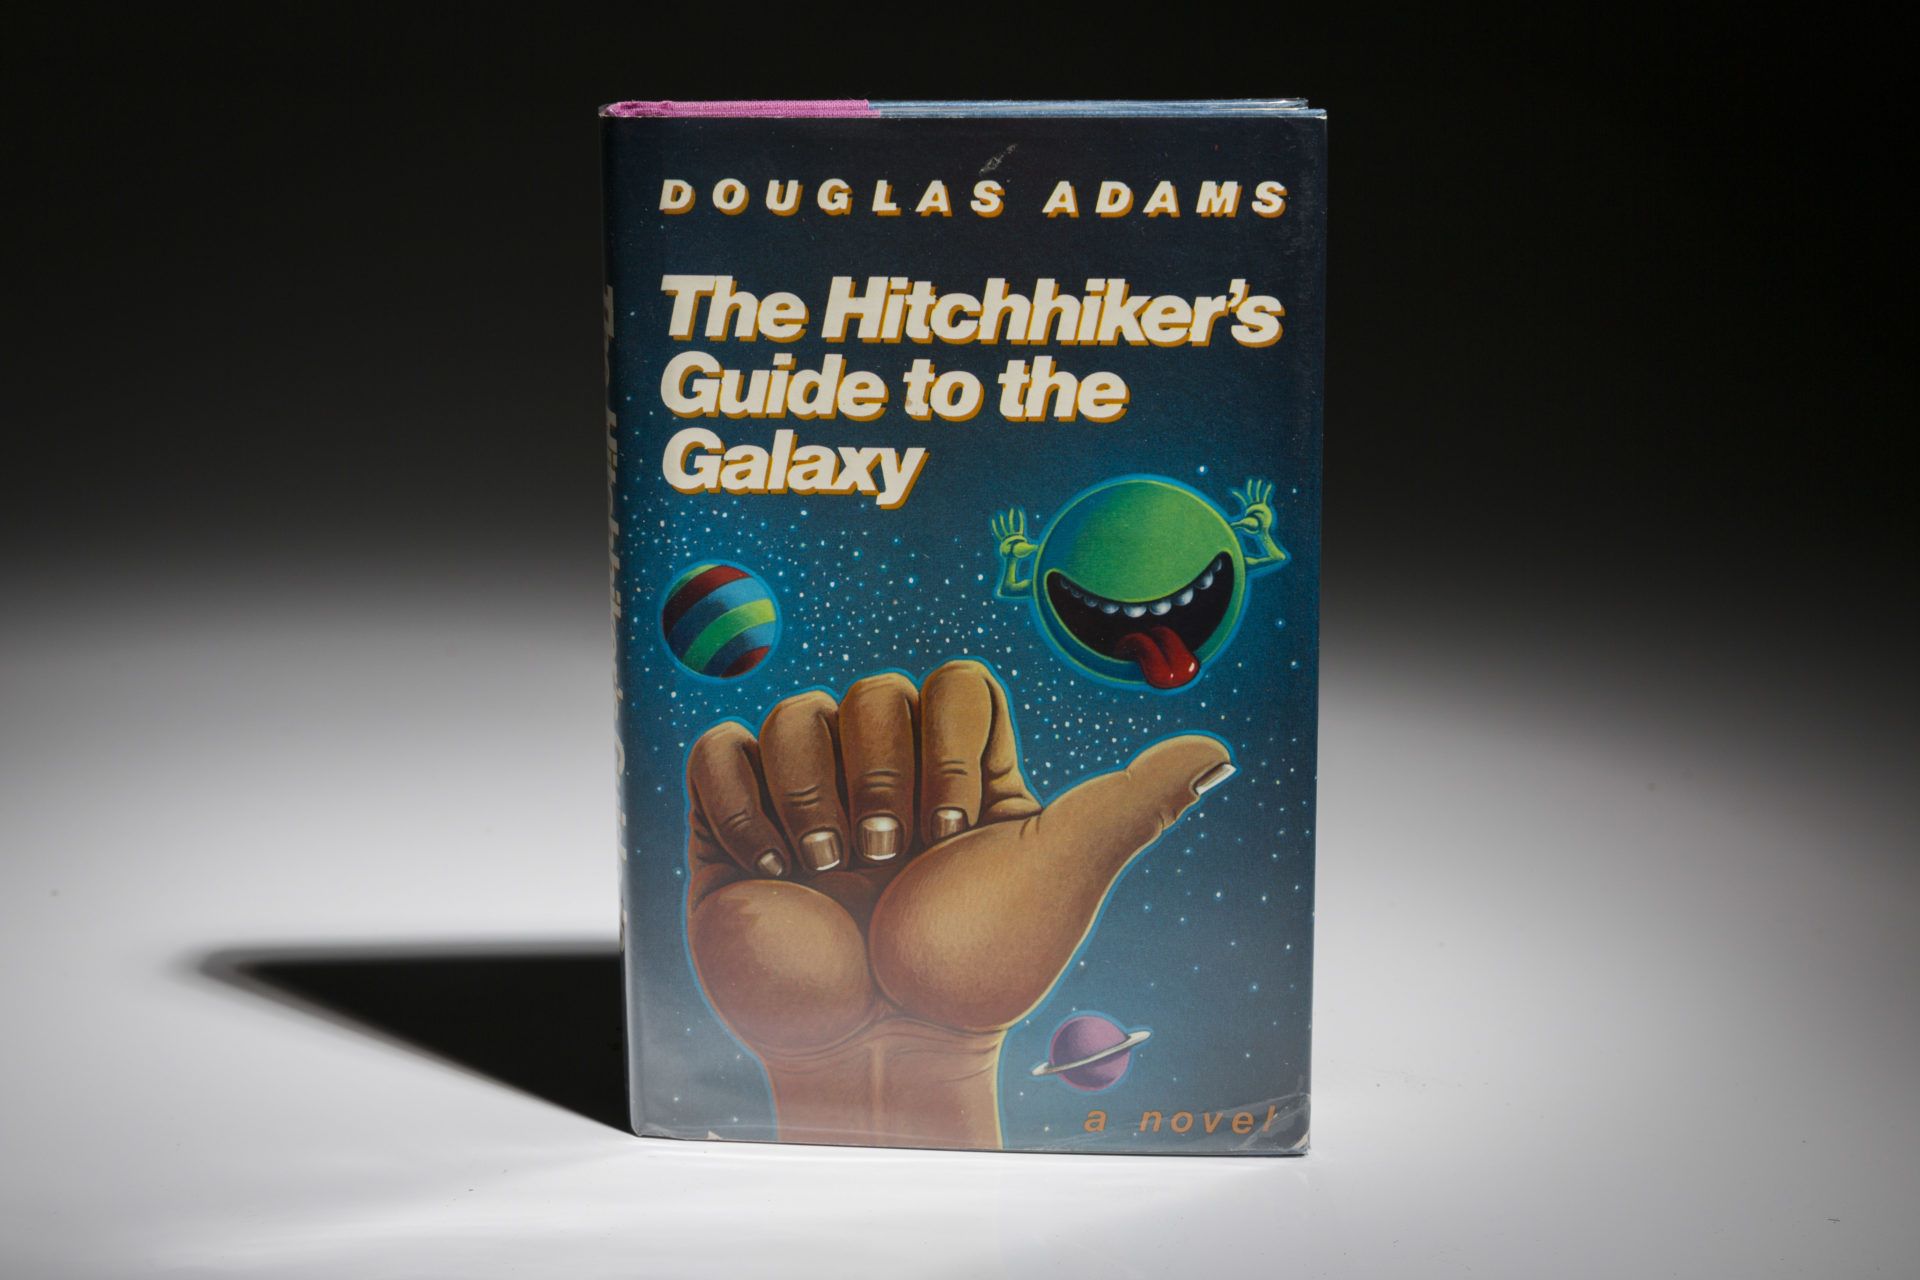 19-astounding-facts-about-the-hitchhikers-guide-to-the-galaxy-douglas-adams